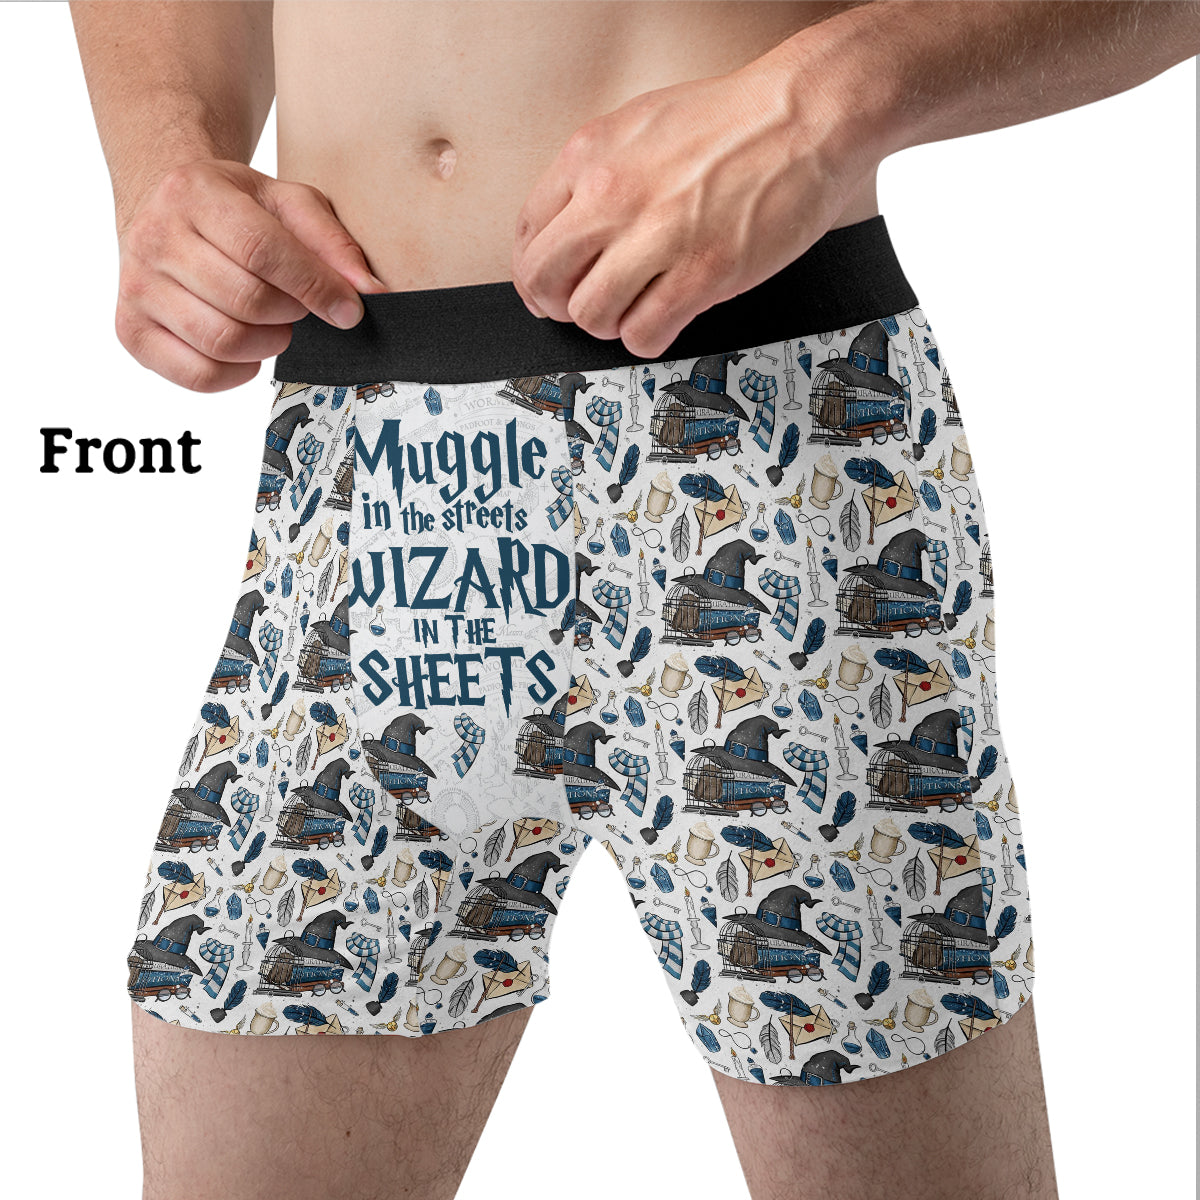 Muggle In The Streets Wizard In The Sheets - Personalized The Magic World Women Briefs & Men Boxer Briefs